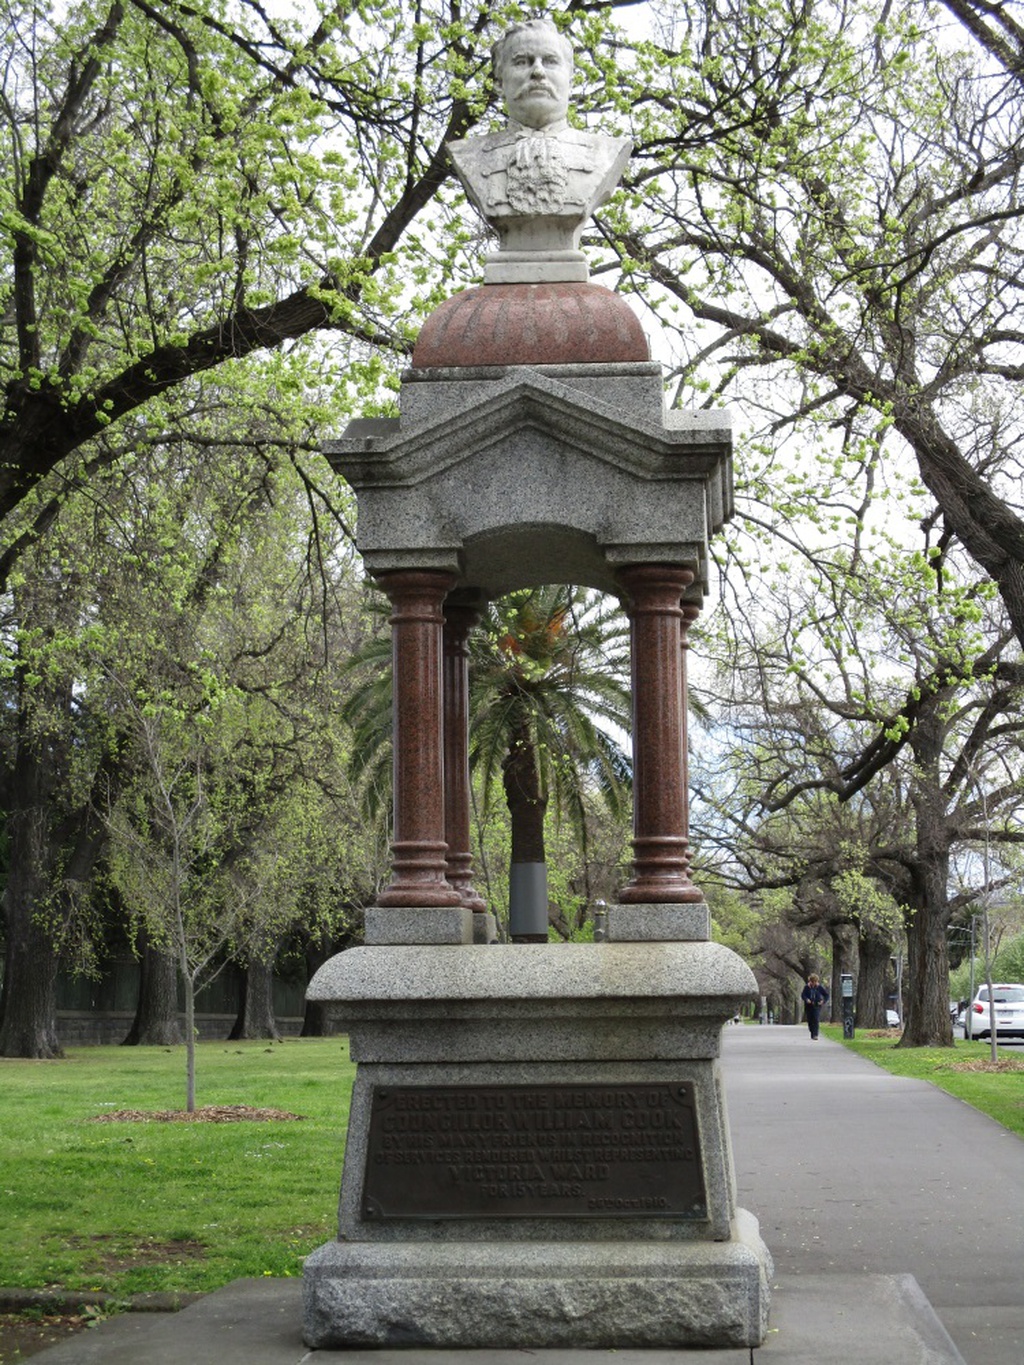 Memorial to William Cook, who served as a Melbourne City Councillor for Victoria Ward from 1894 to 1909.